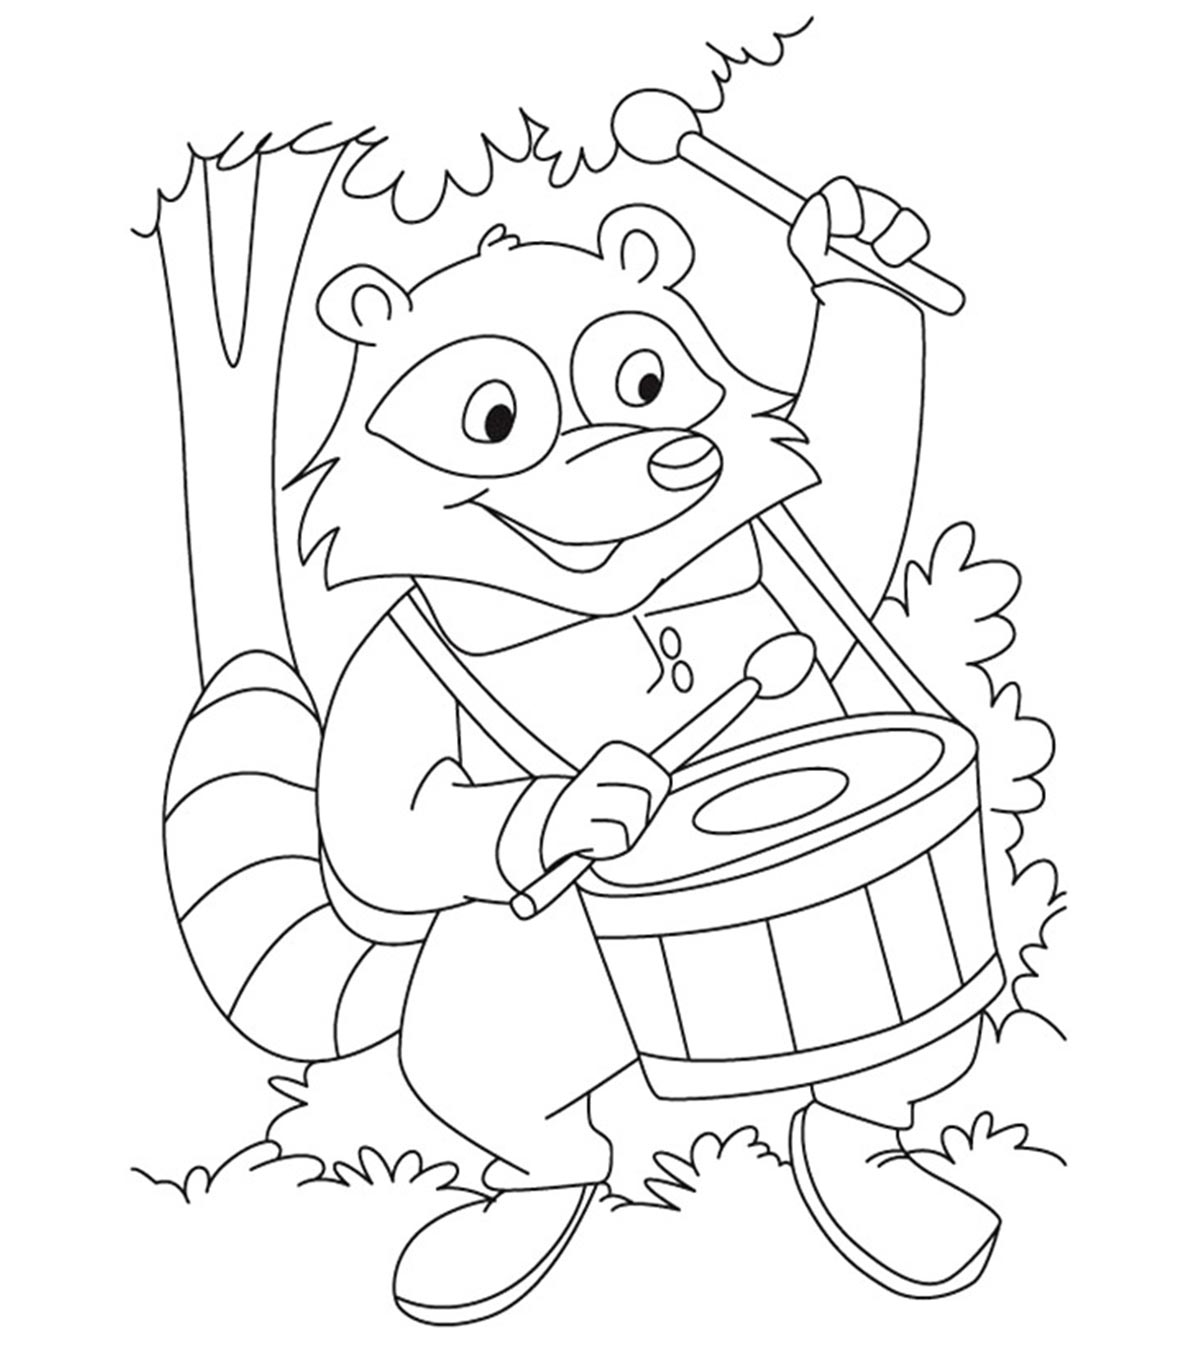 10 Funny Raccoon Coloring Pages Your Toddler Will Love To Color